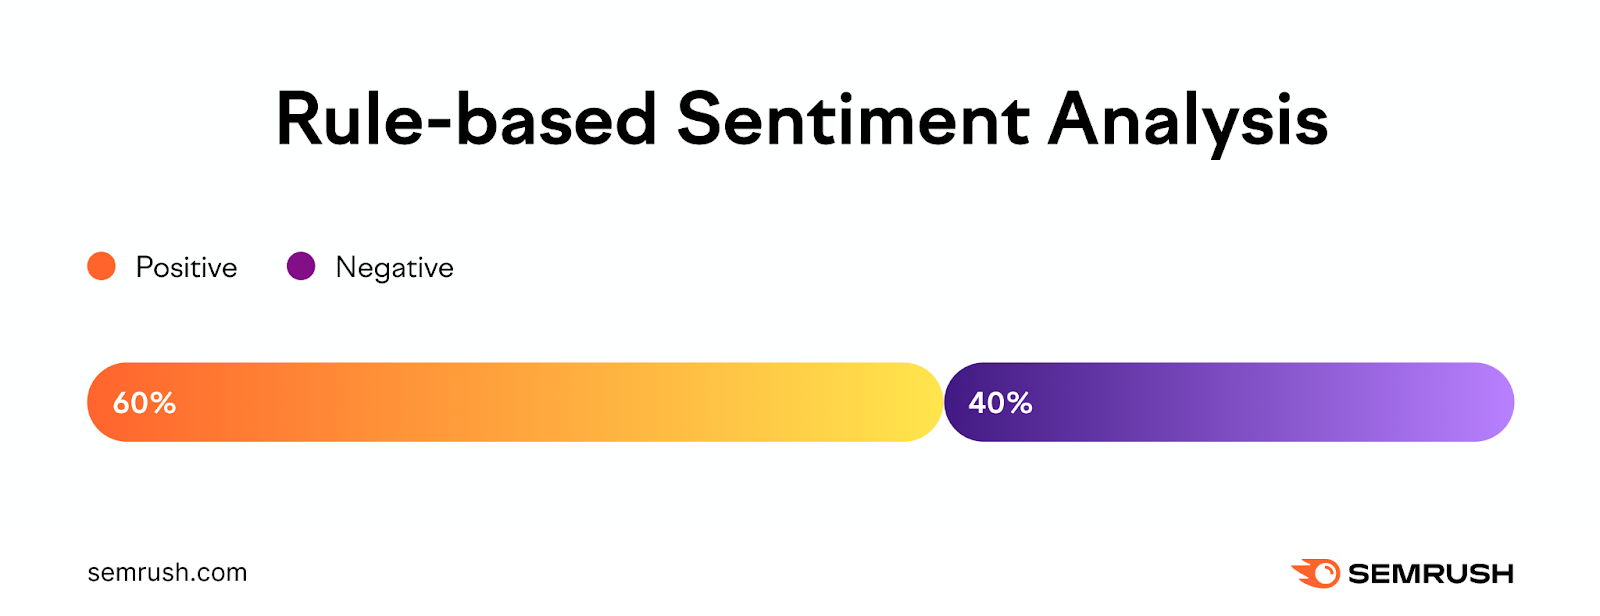 Rule-based sentiment analysis bar graph with 60% positive sentiment and 40% negative sentiment.